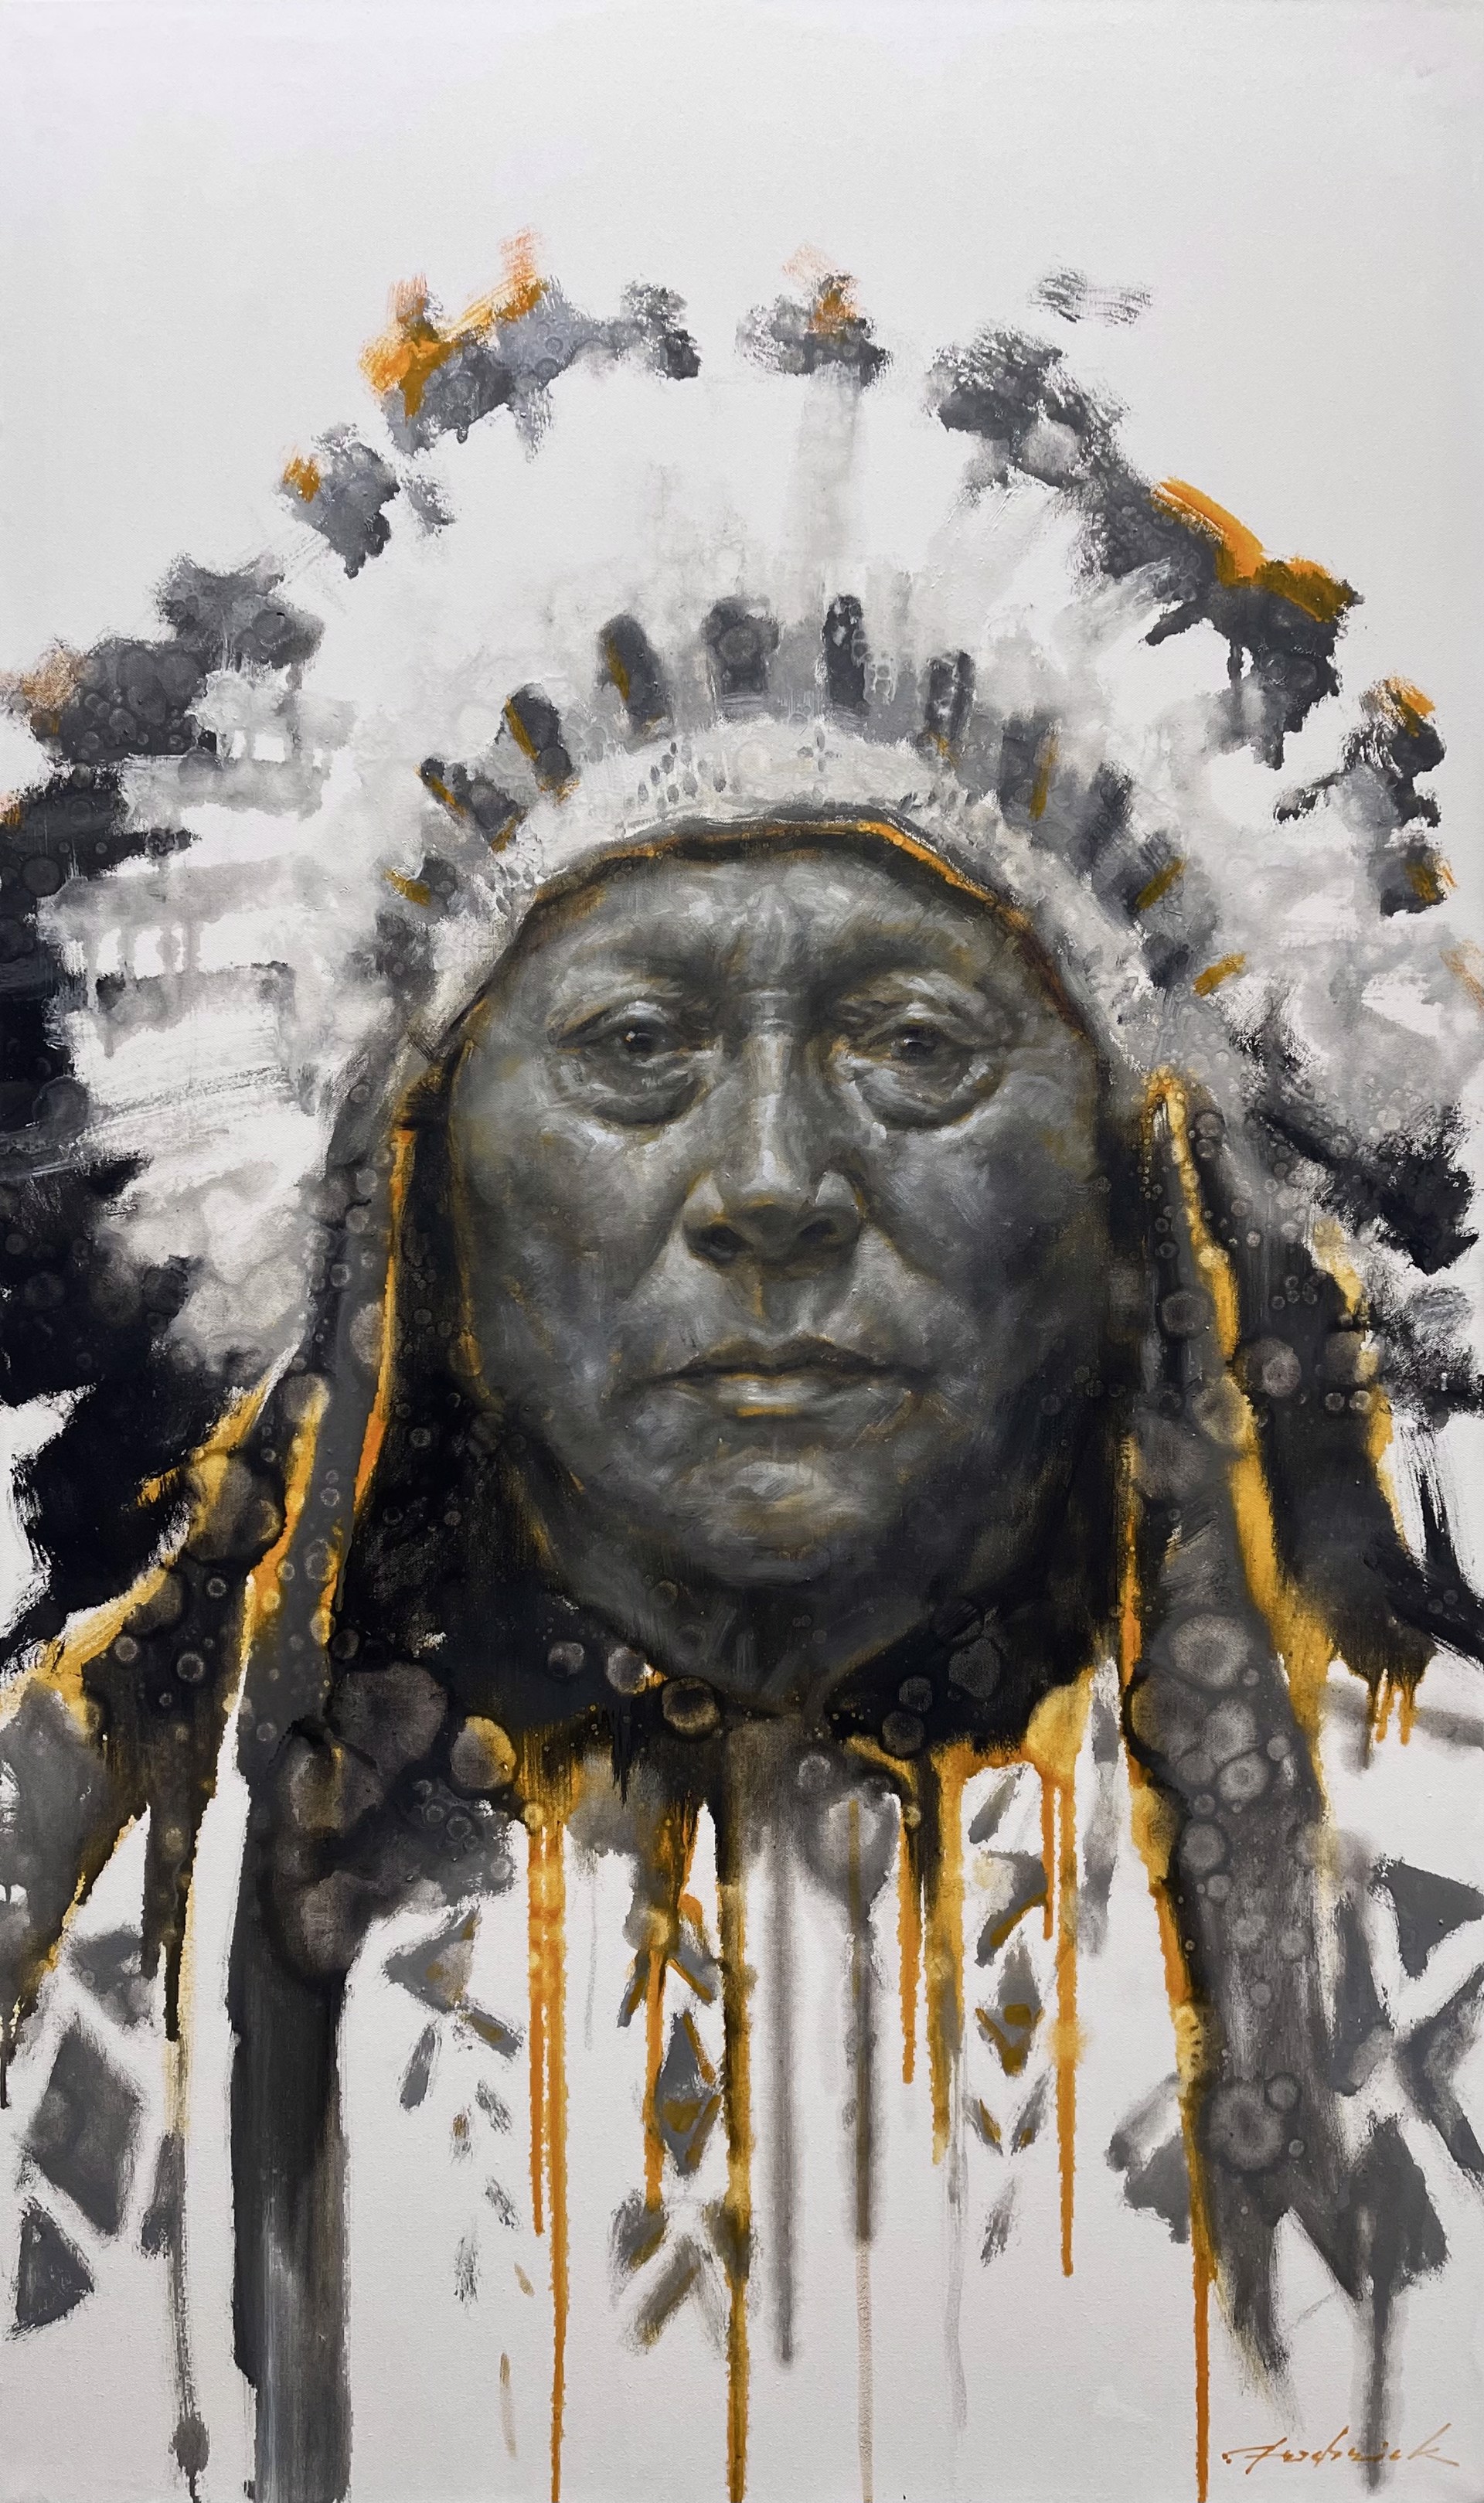 CHIEF HOLLOW HORN BEAR by David Frederick Riley